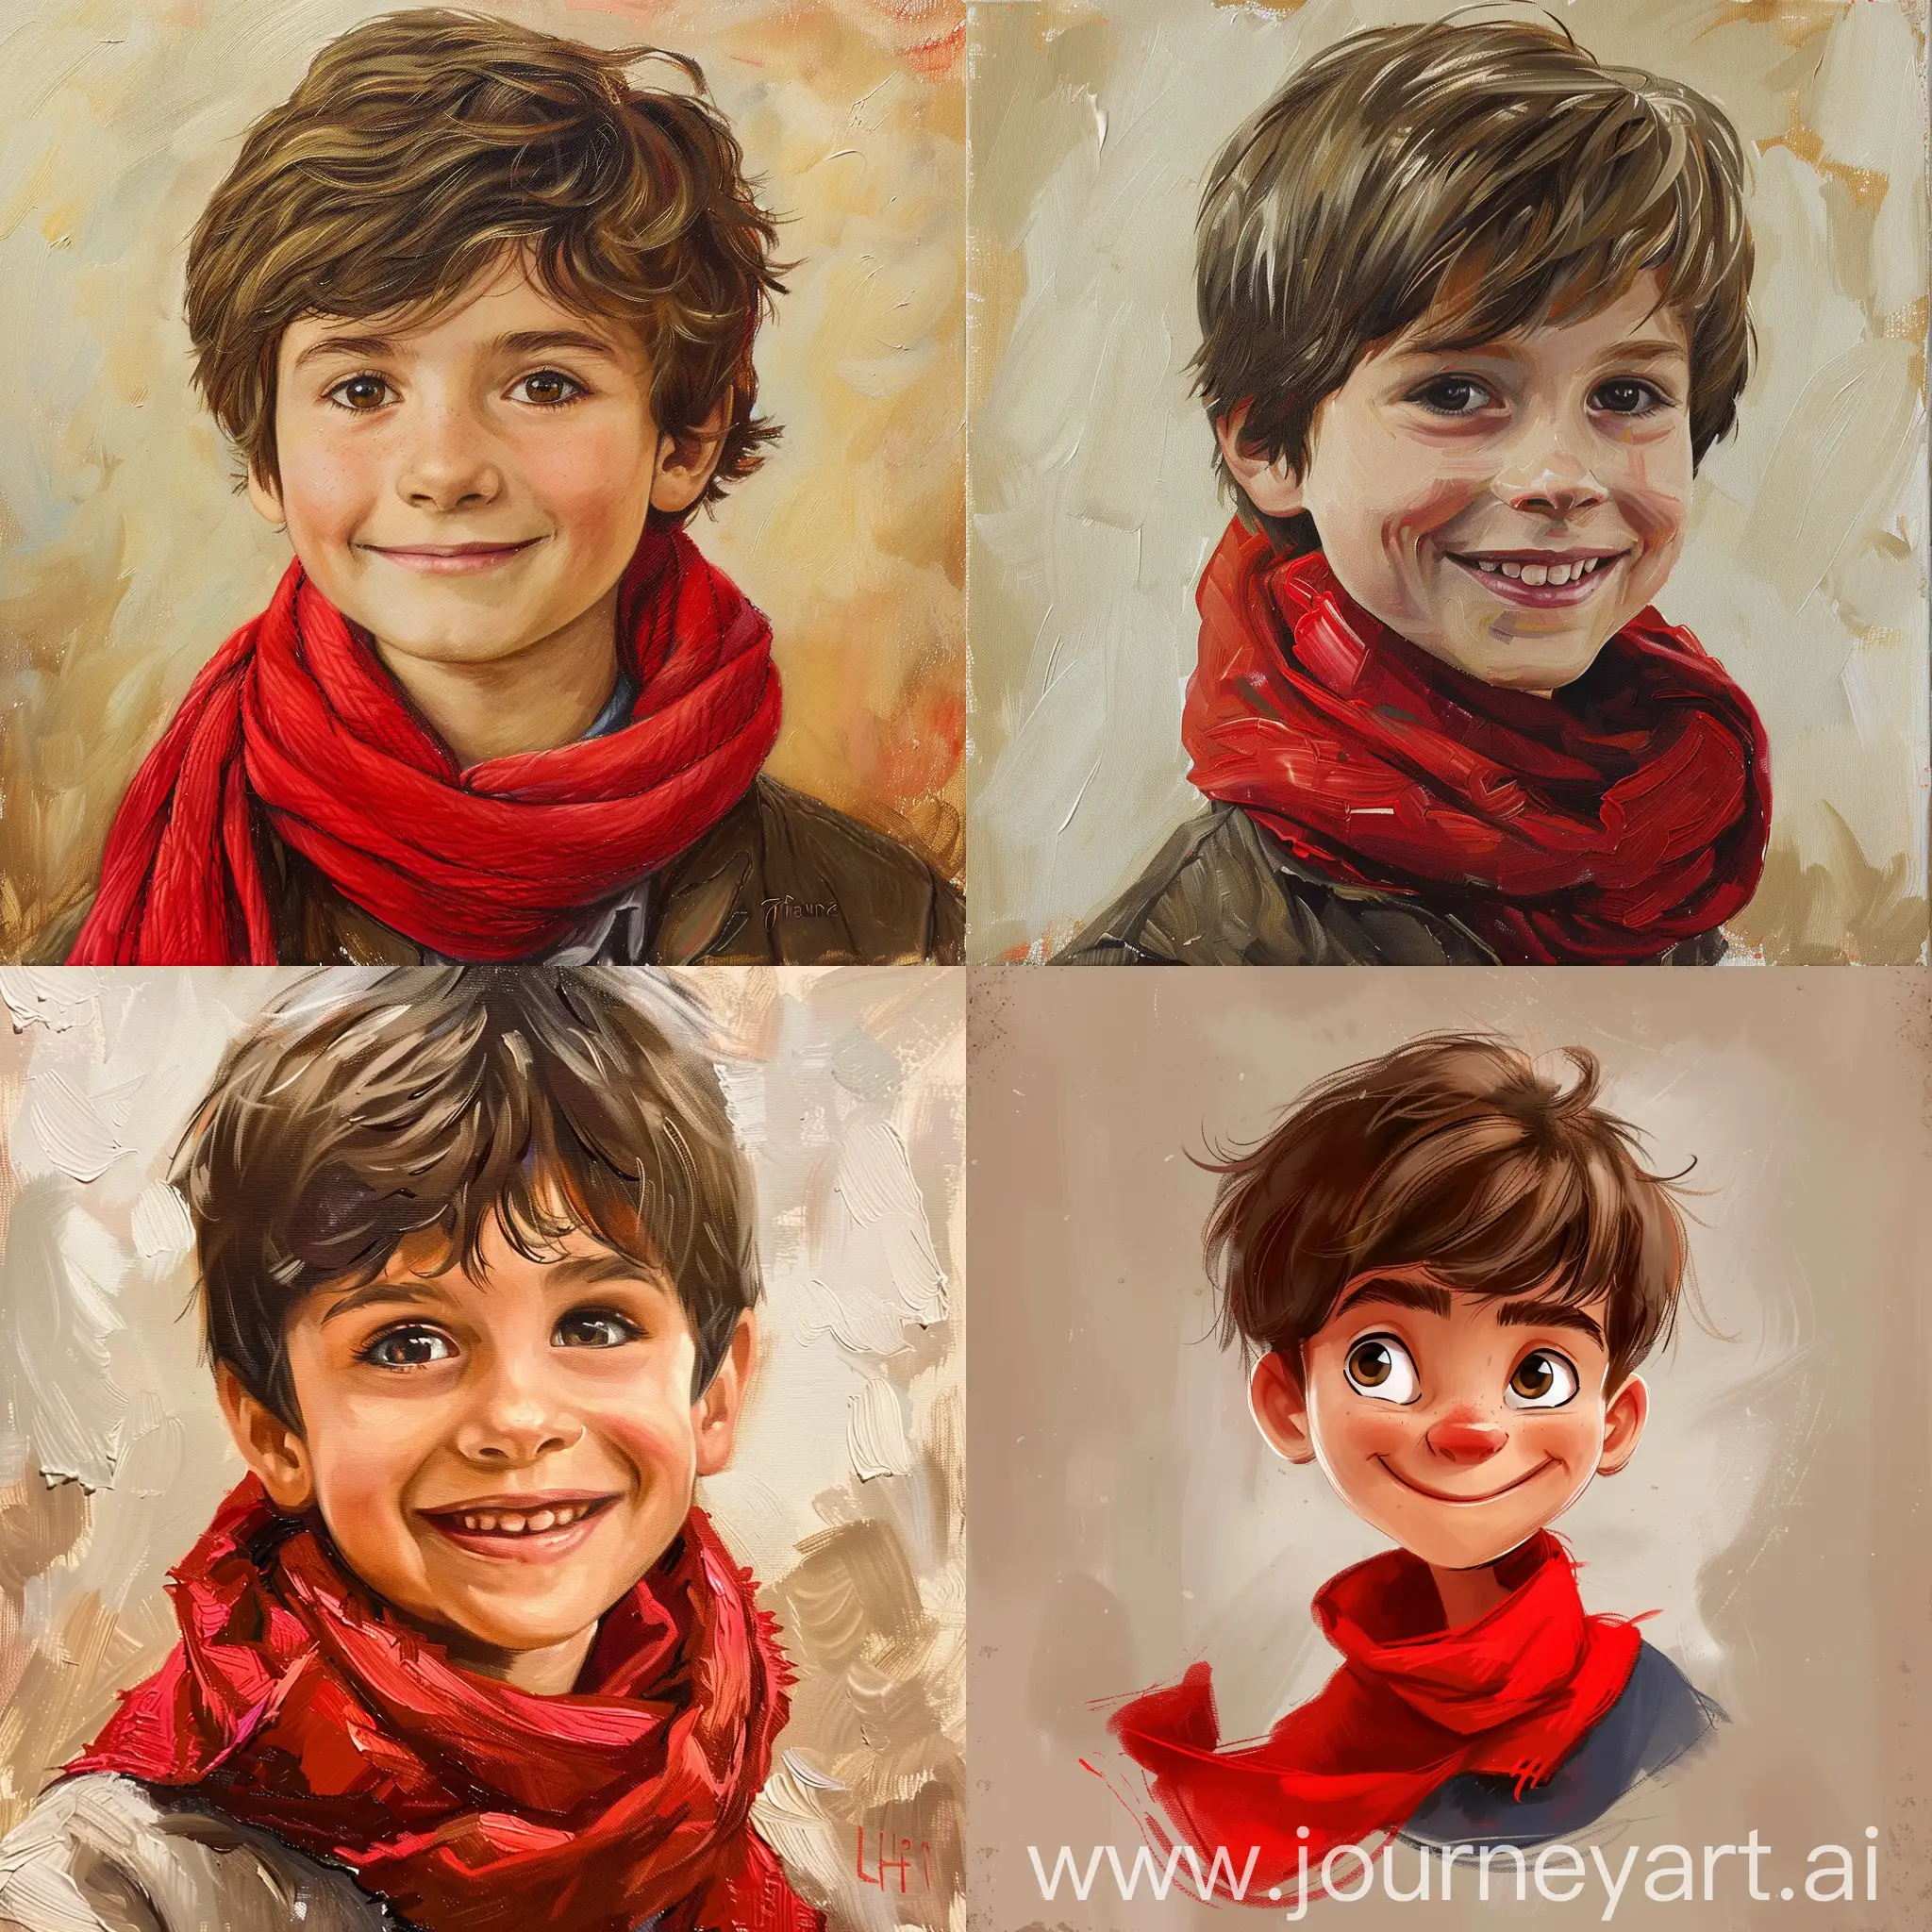 Cheerful-Boy-Portrait-Smiling-Child-with-Brown-Hair-and-Red-Scarf